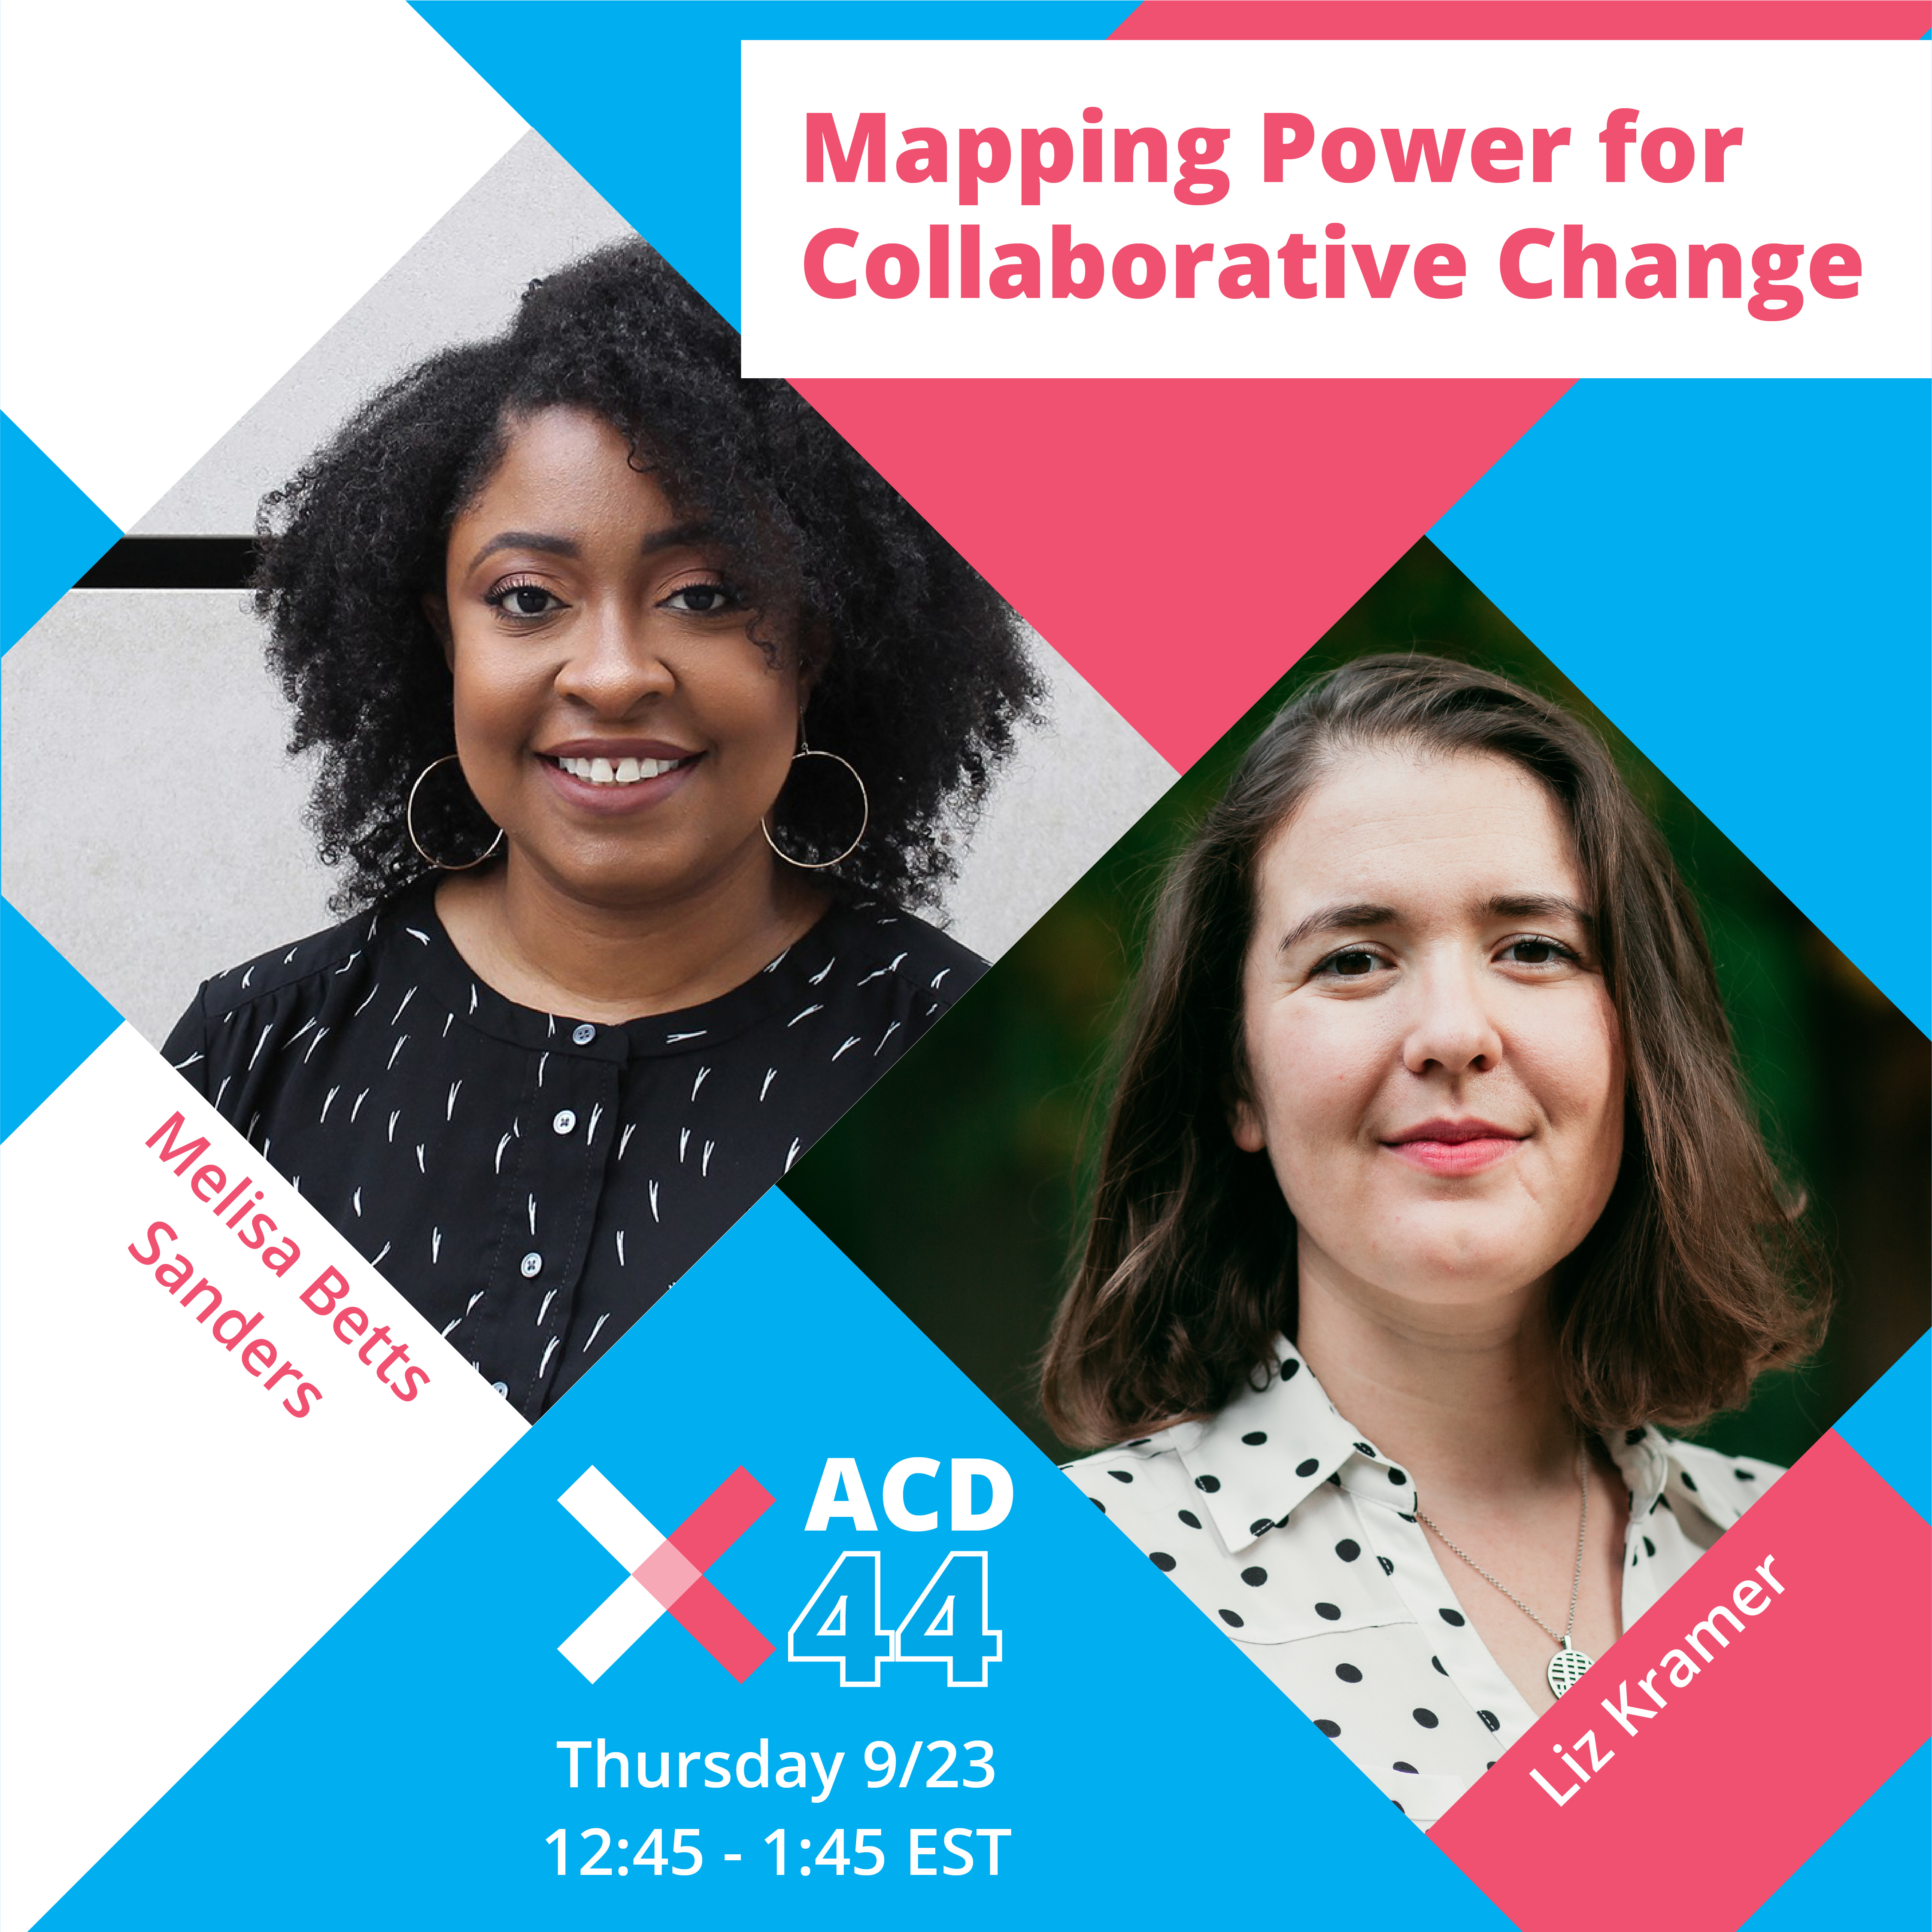 ACD2021: Mapping Power for Collaborative Change